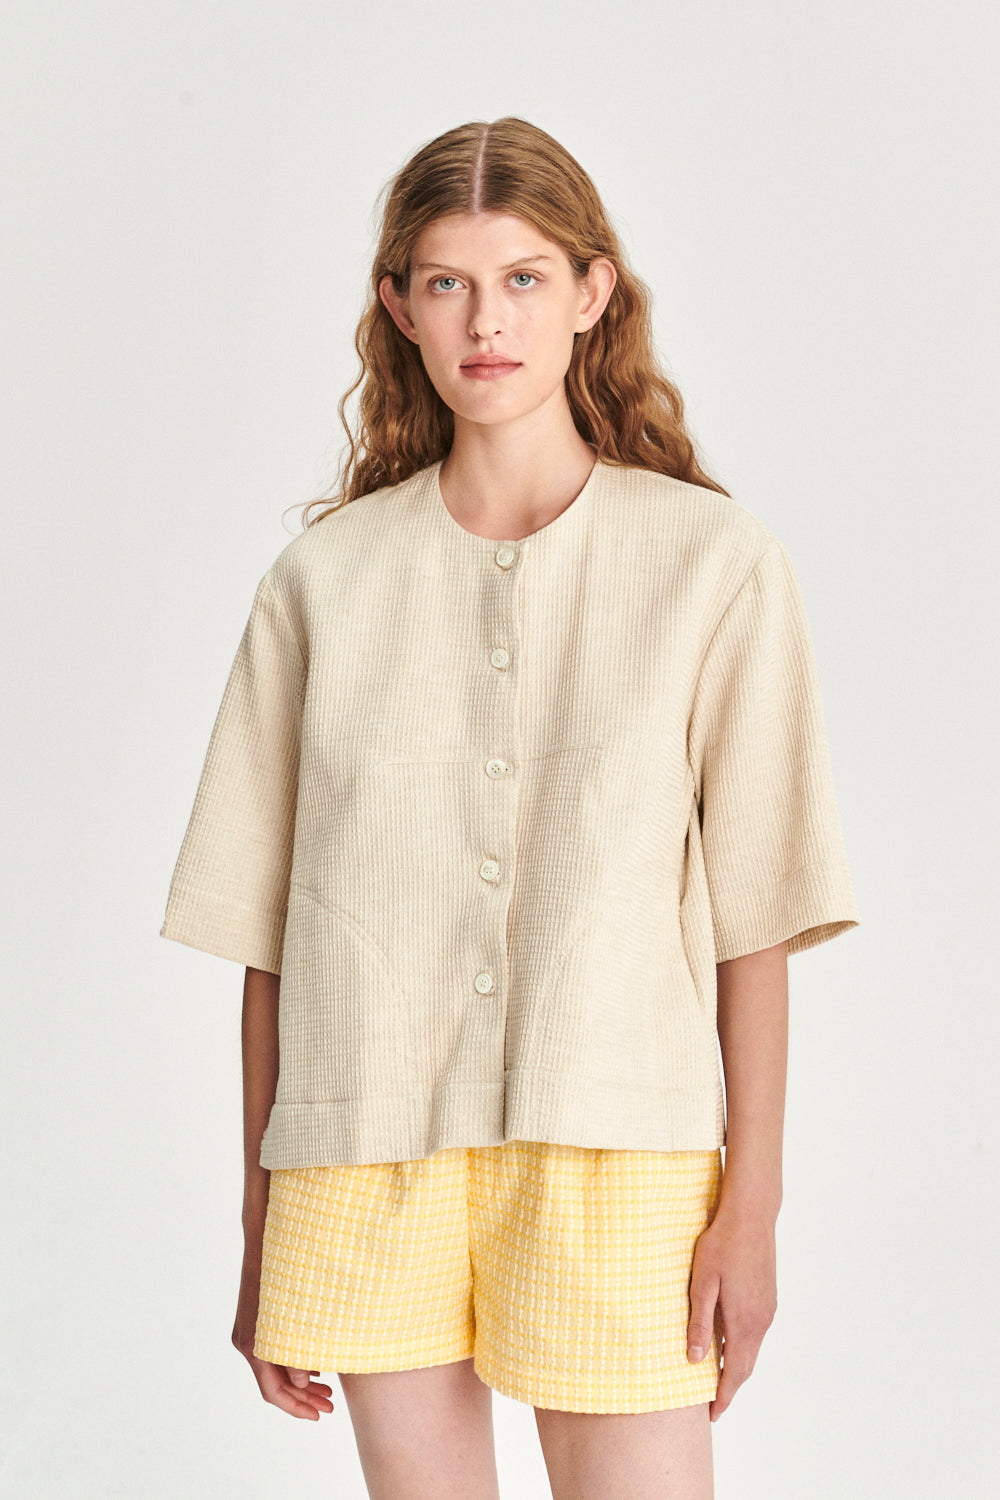 Collarless Jacket Shirt in a Light Beige Structural Waffled Japanese Cotton and Linen